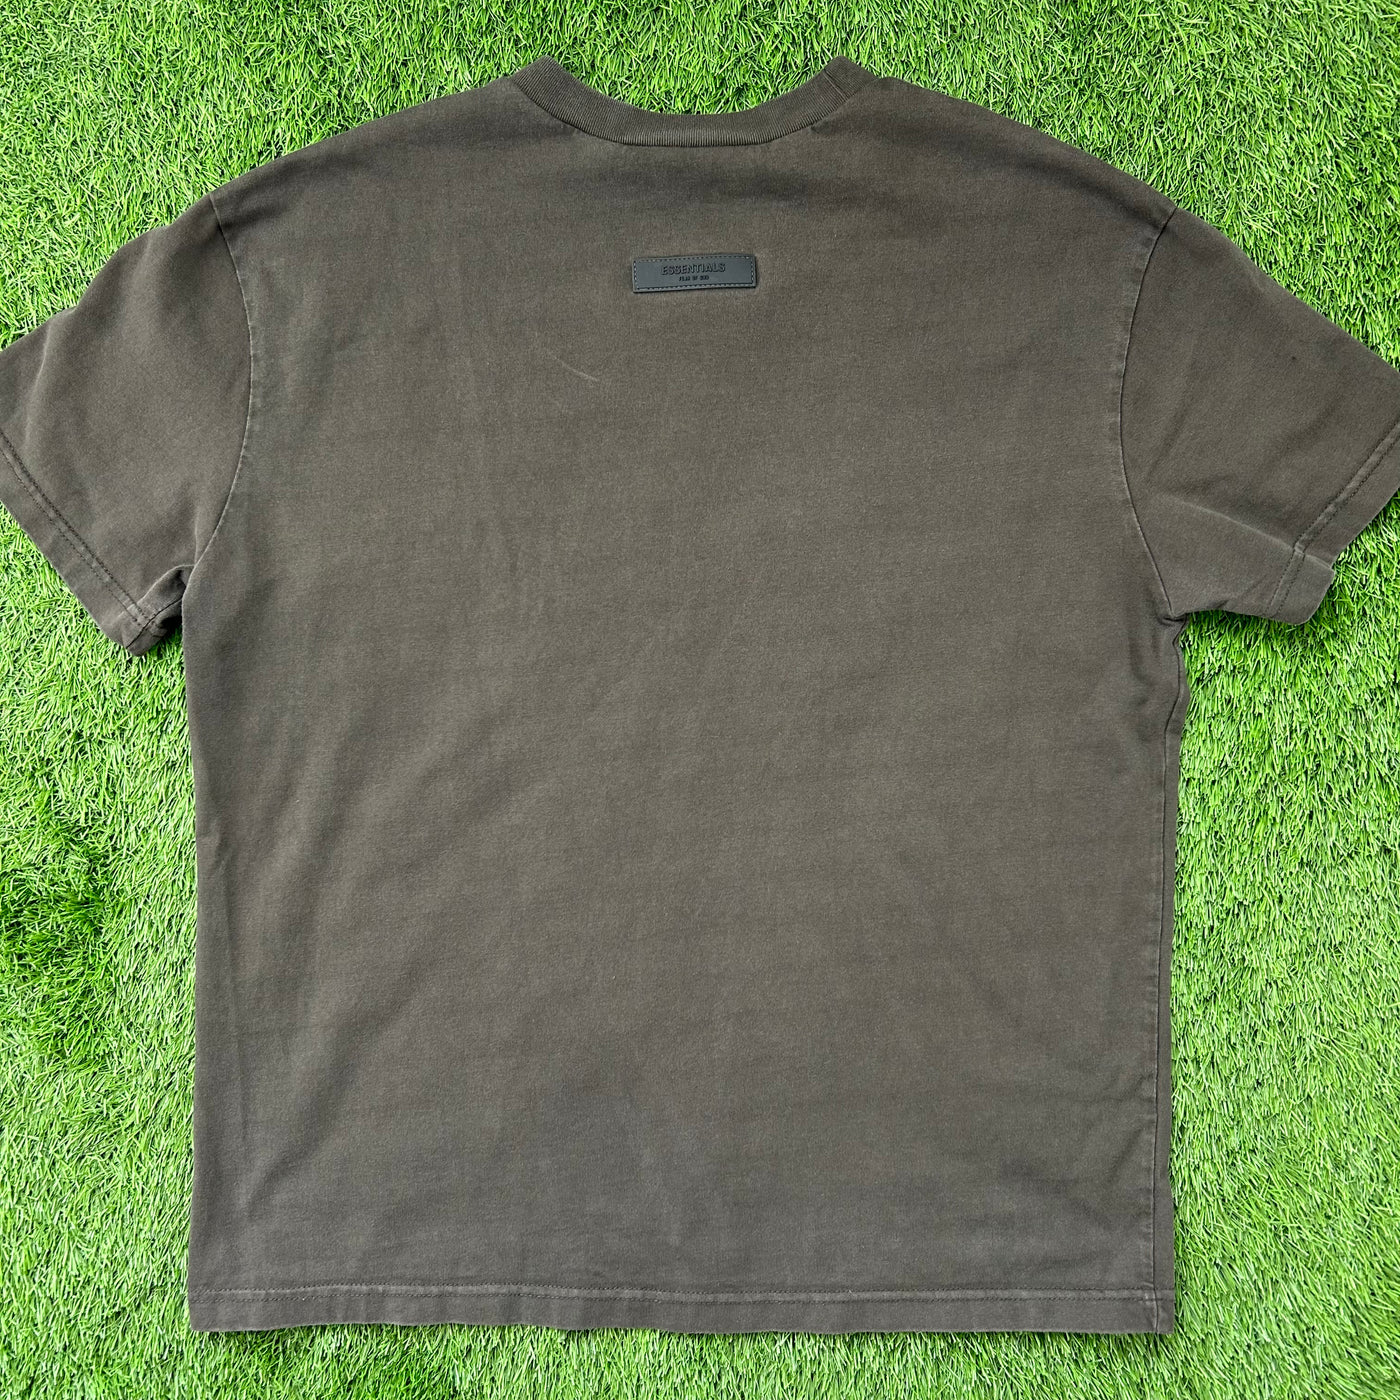 Essentials Fear of God Tee